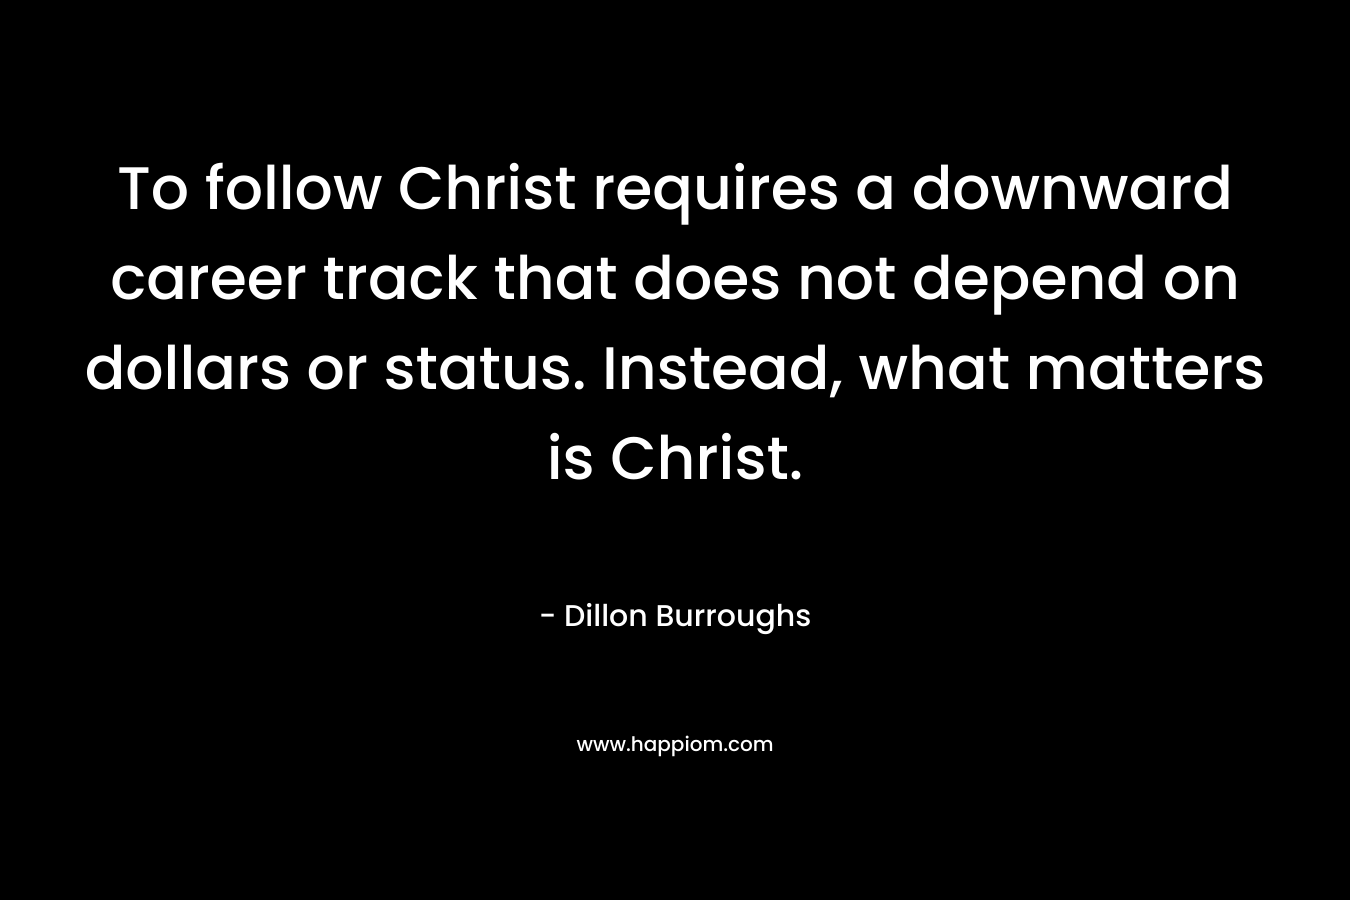 To follow Christ requires a downward career track that does not depend on dollars or status. Instead, what matters is Christ. – Dillon Burroughs